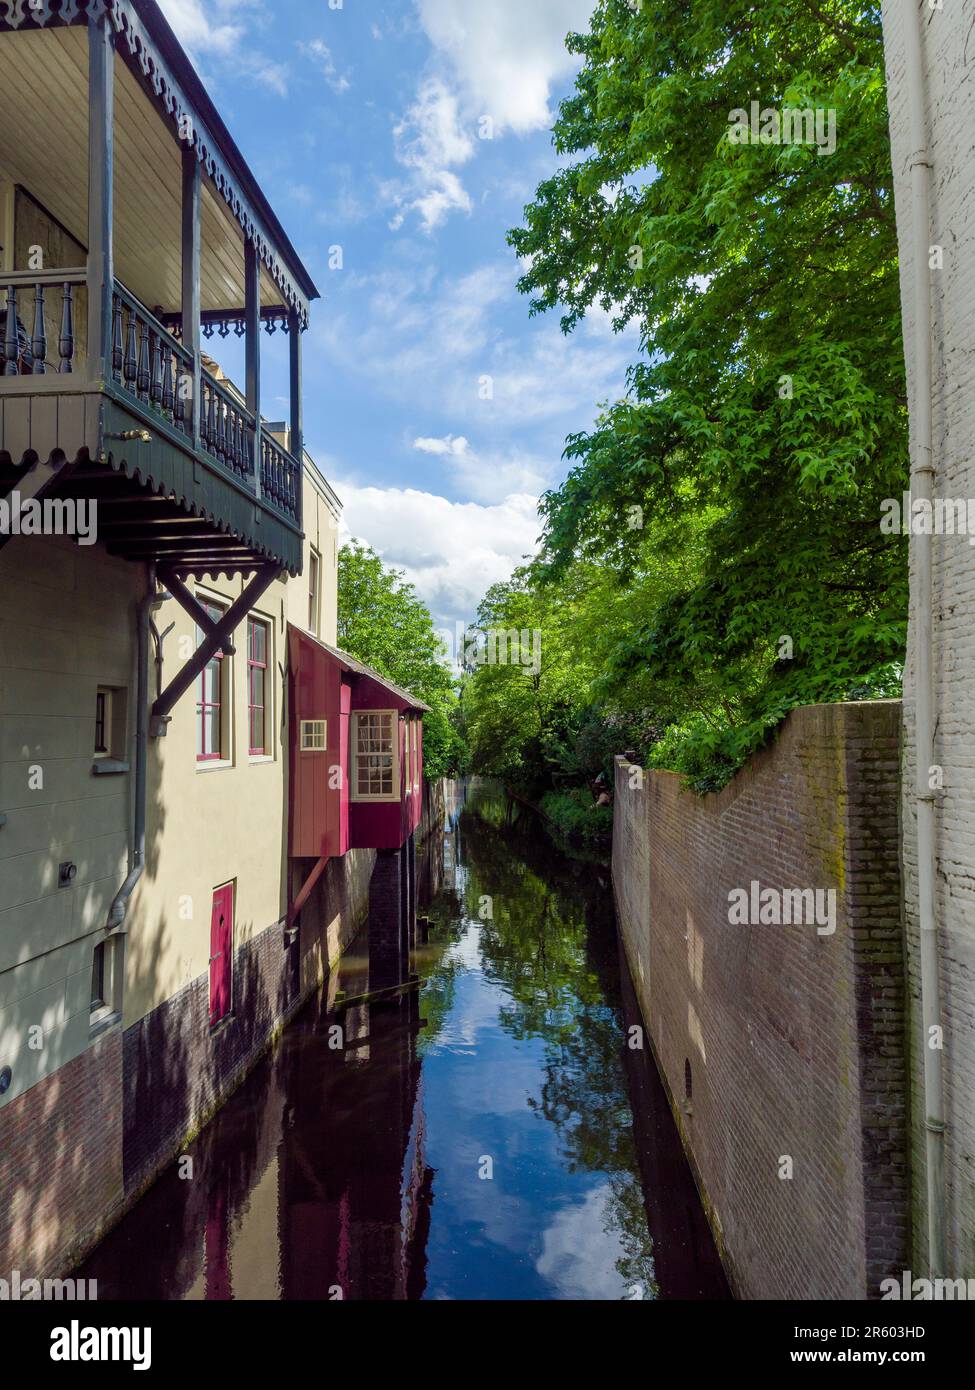 Part of the Binnendieze canal system in the Dutch city of Den Bosch, Netherlands, Europe. Stock Photo